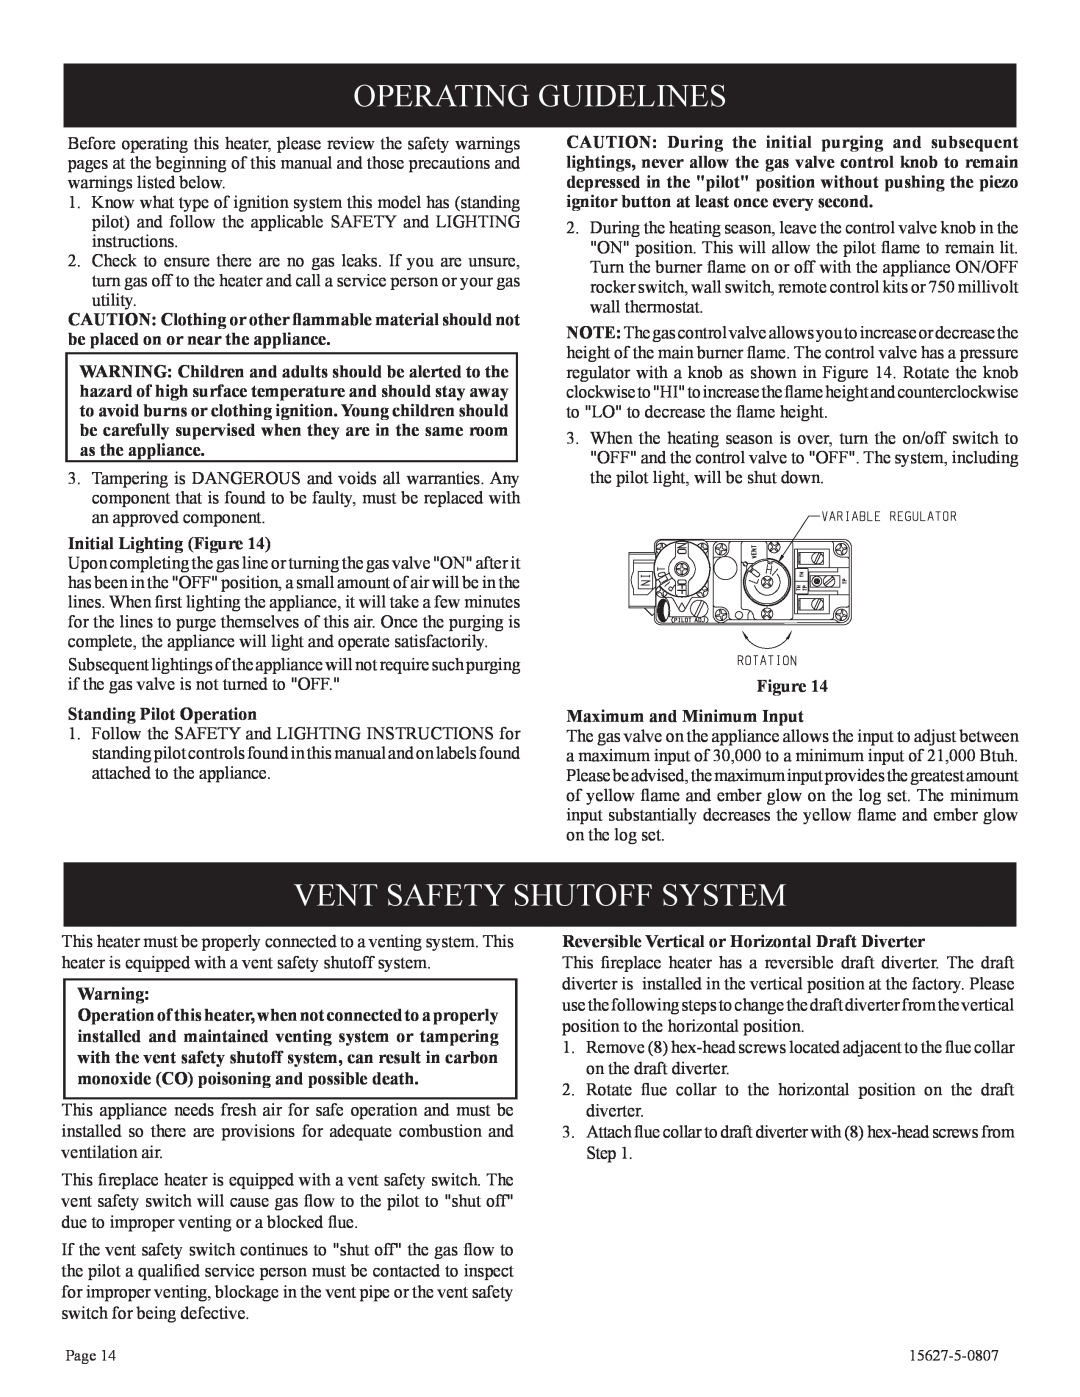 Empire Comfort Systems CIBV-30-20 Operating Guidelines, Vent Safety Shutoff System, Initial Lighting Figure 